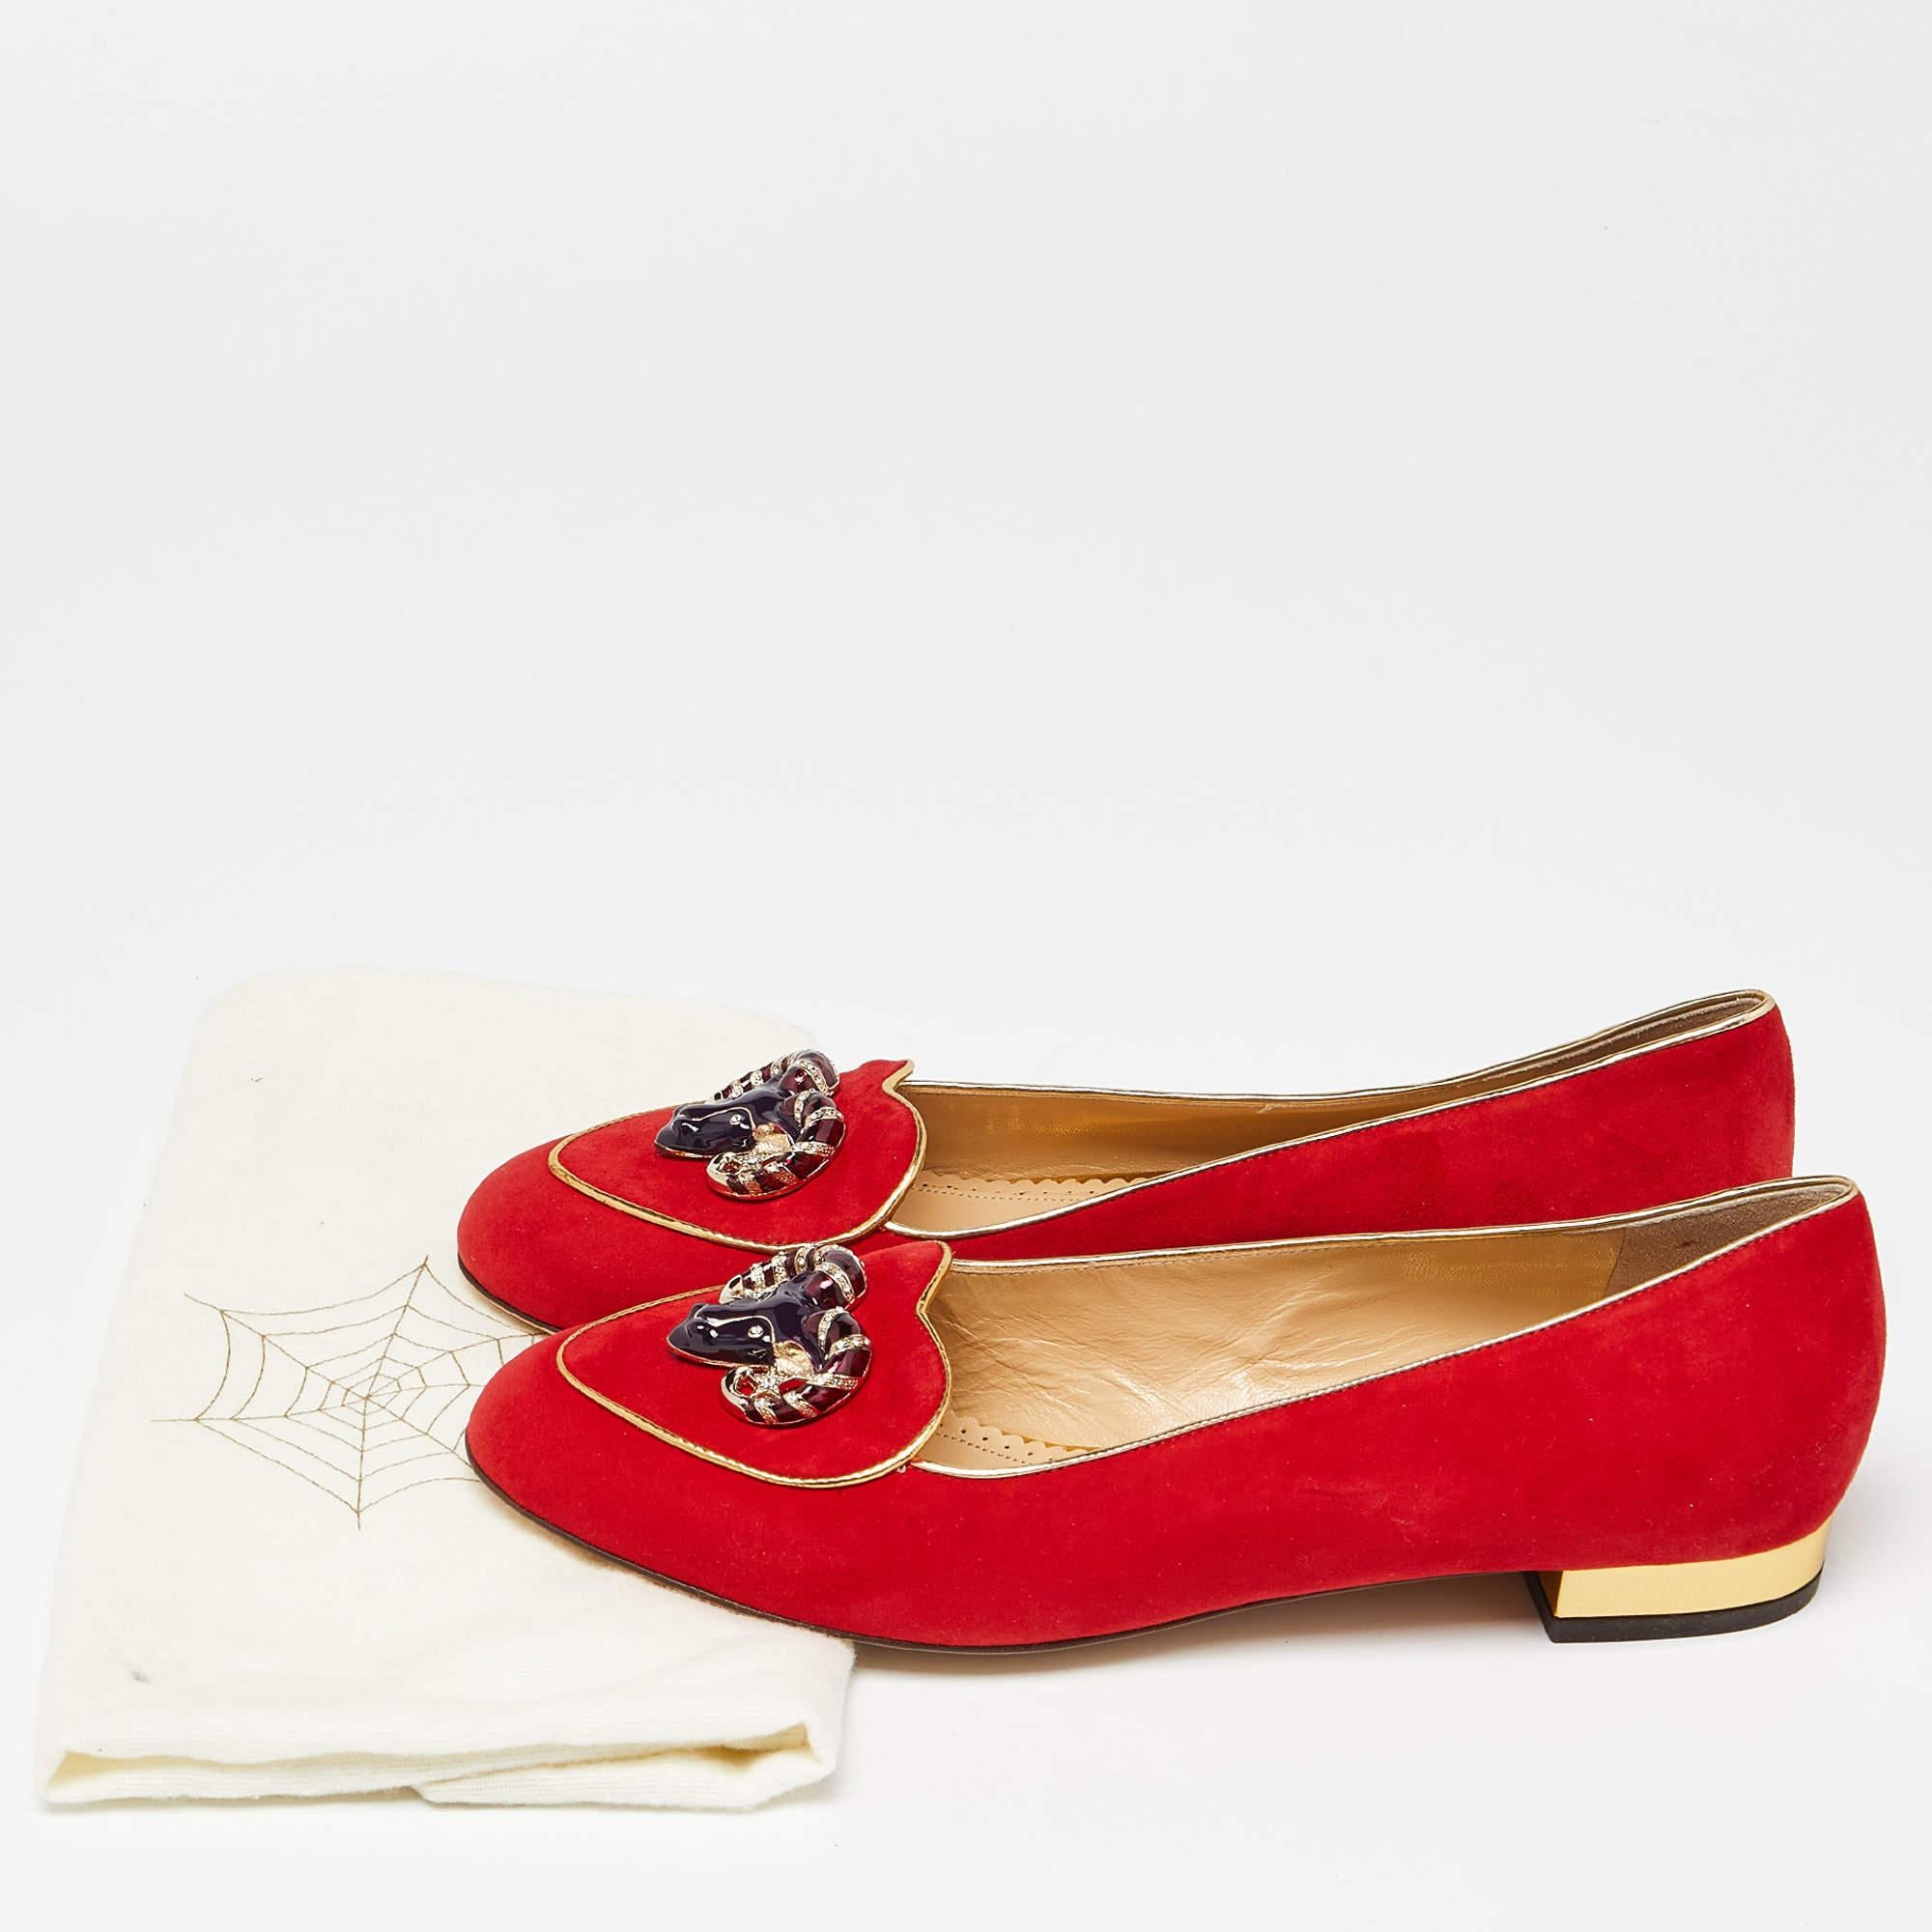 Charlotte Olympia Red Suede Aries Smoking Slippers Size 39 5